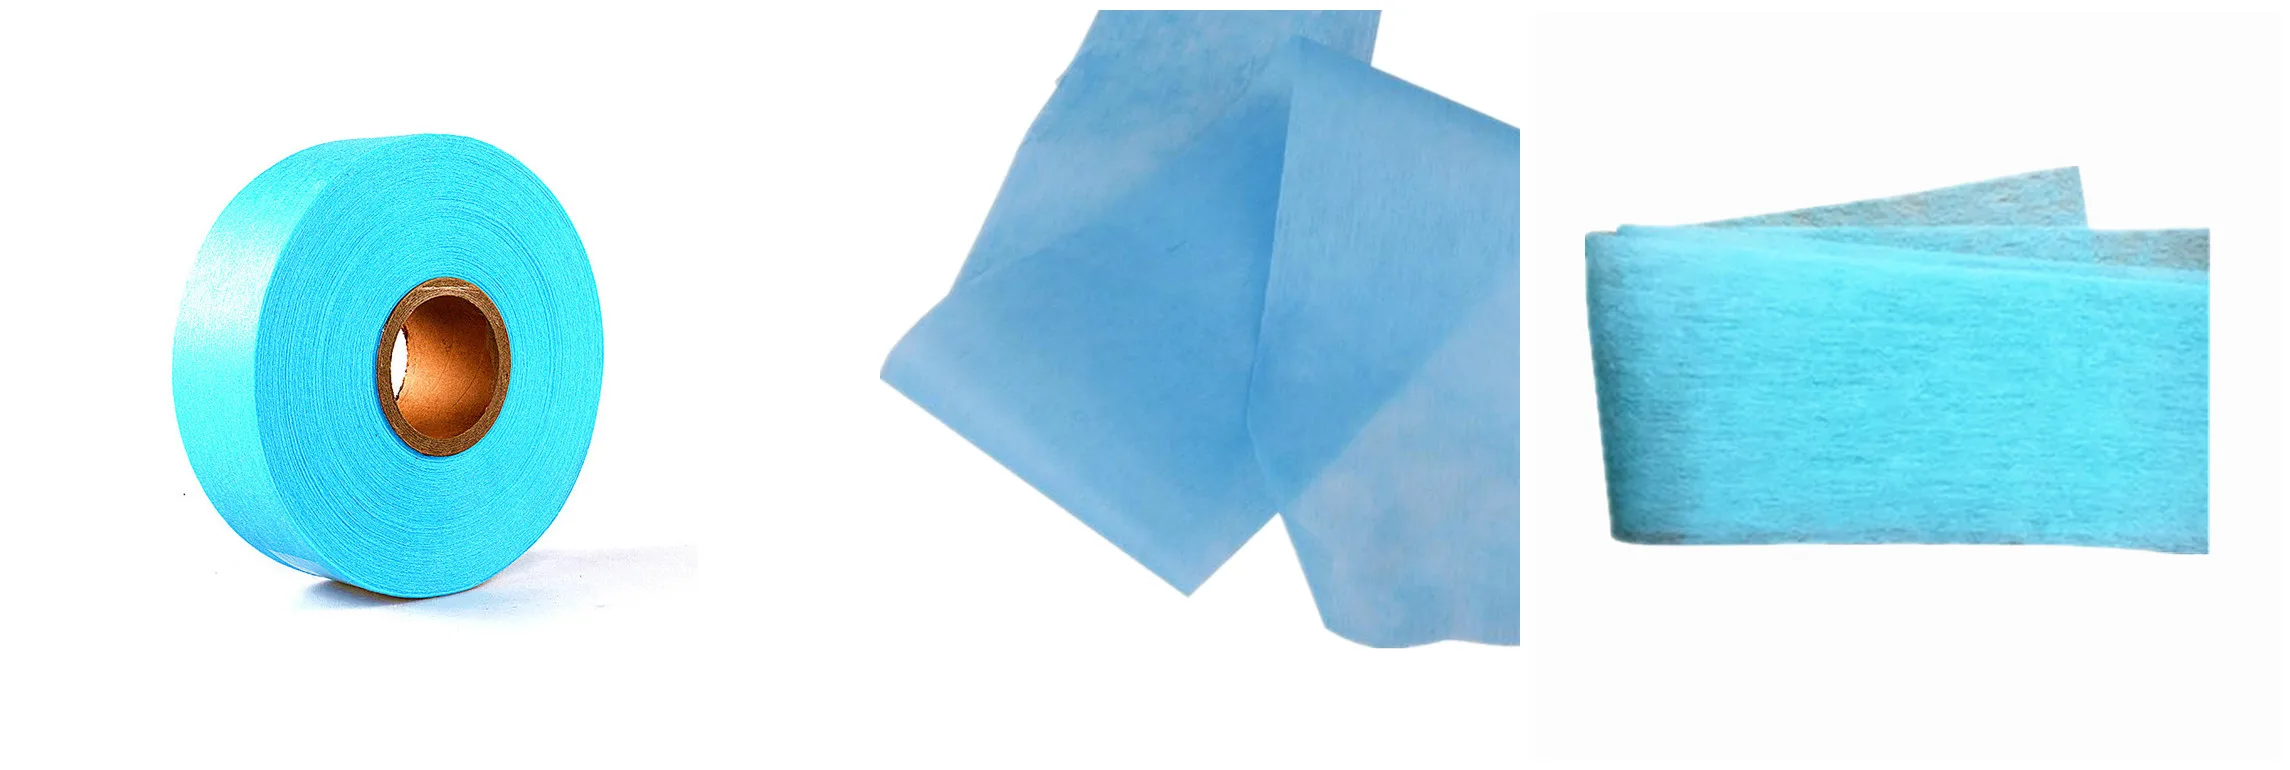 Great Absorbent Blue ADL Disposable Diaper with Nonwoven Fabric